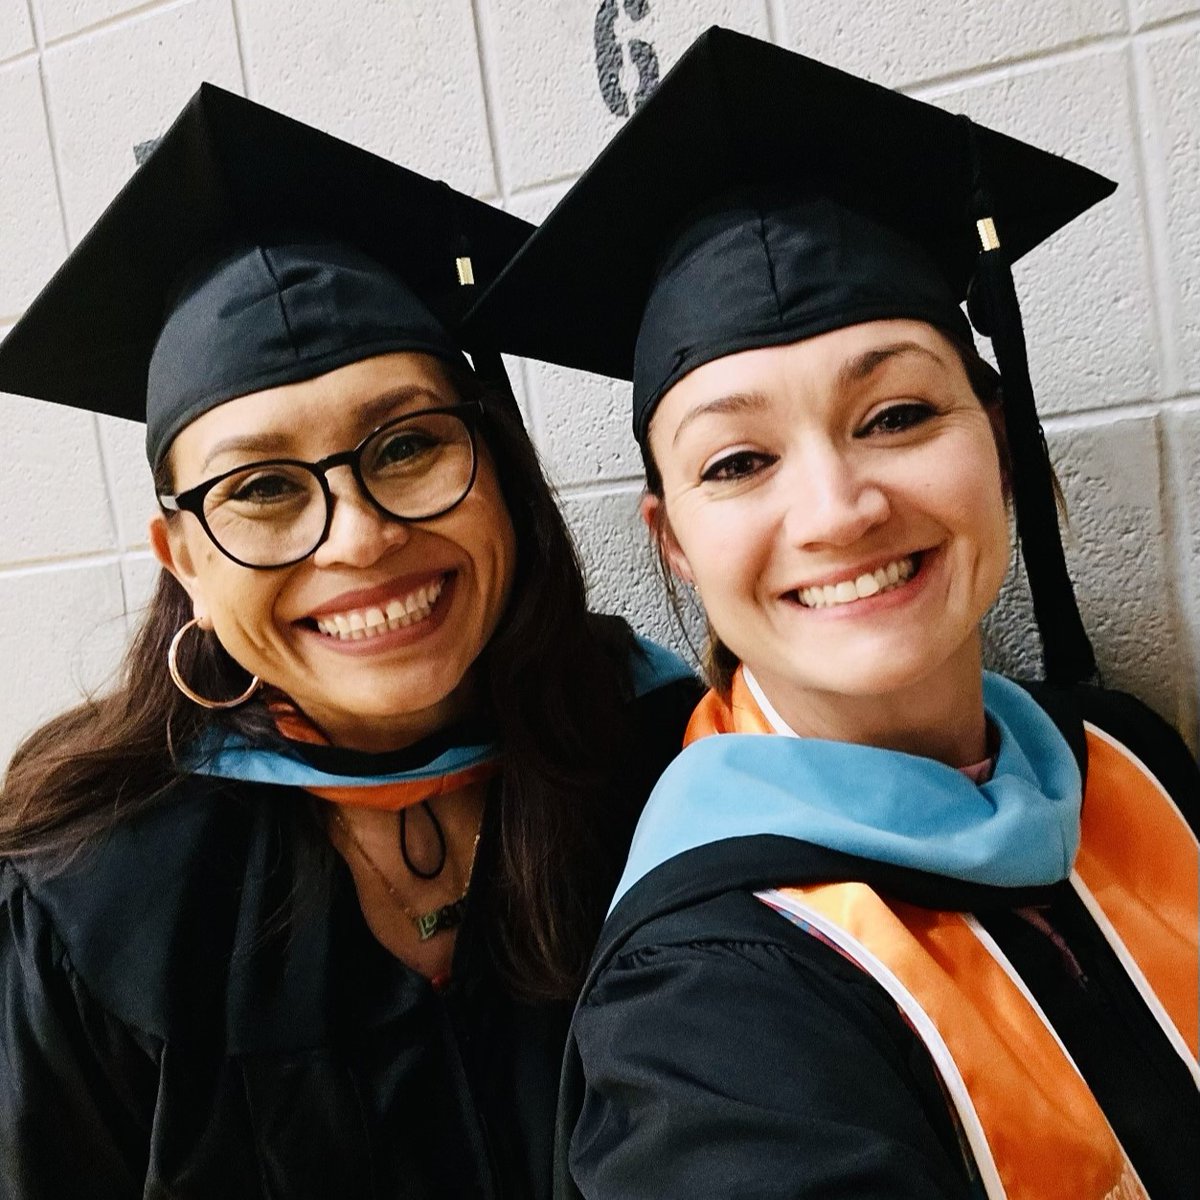 Ada Barron and Eva Baker, Splendora ISD educators, earned Master's Degrees via a Texas COVID Learning Acceleration Supports grant. They are ready to enhance SHS Early College High School classrooms with dual credit courses!